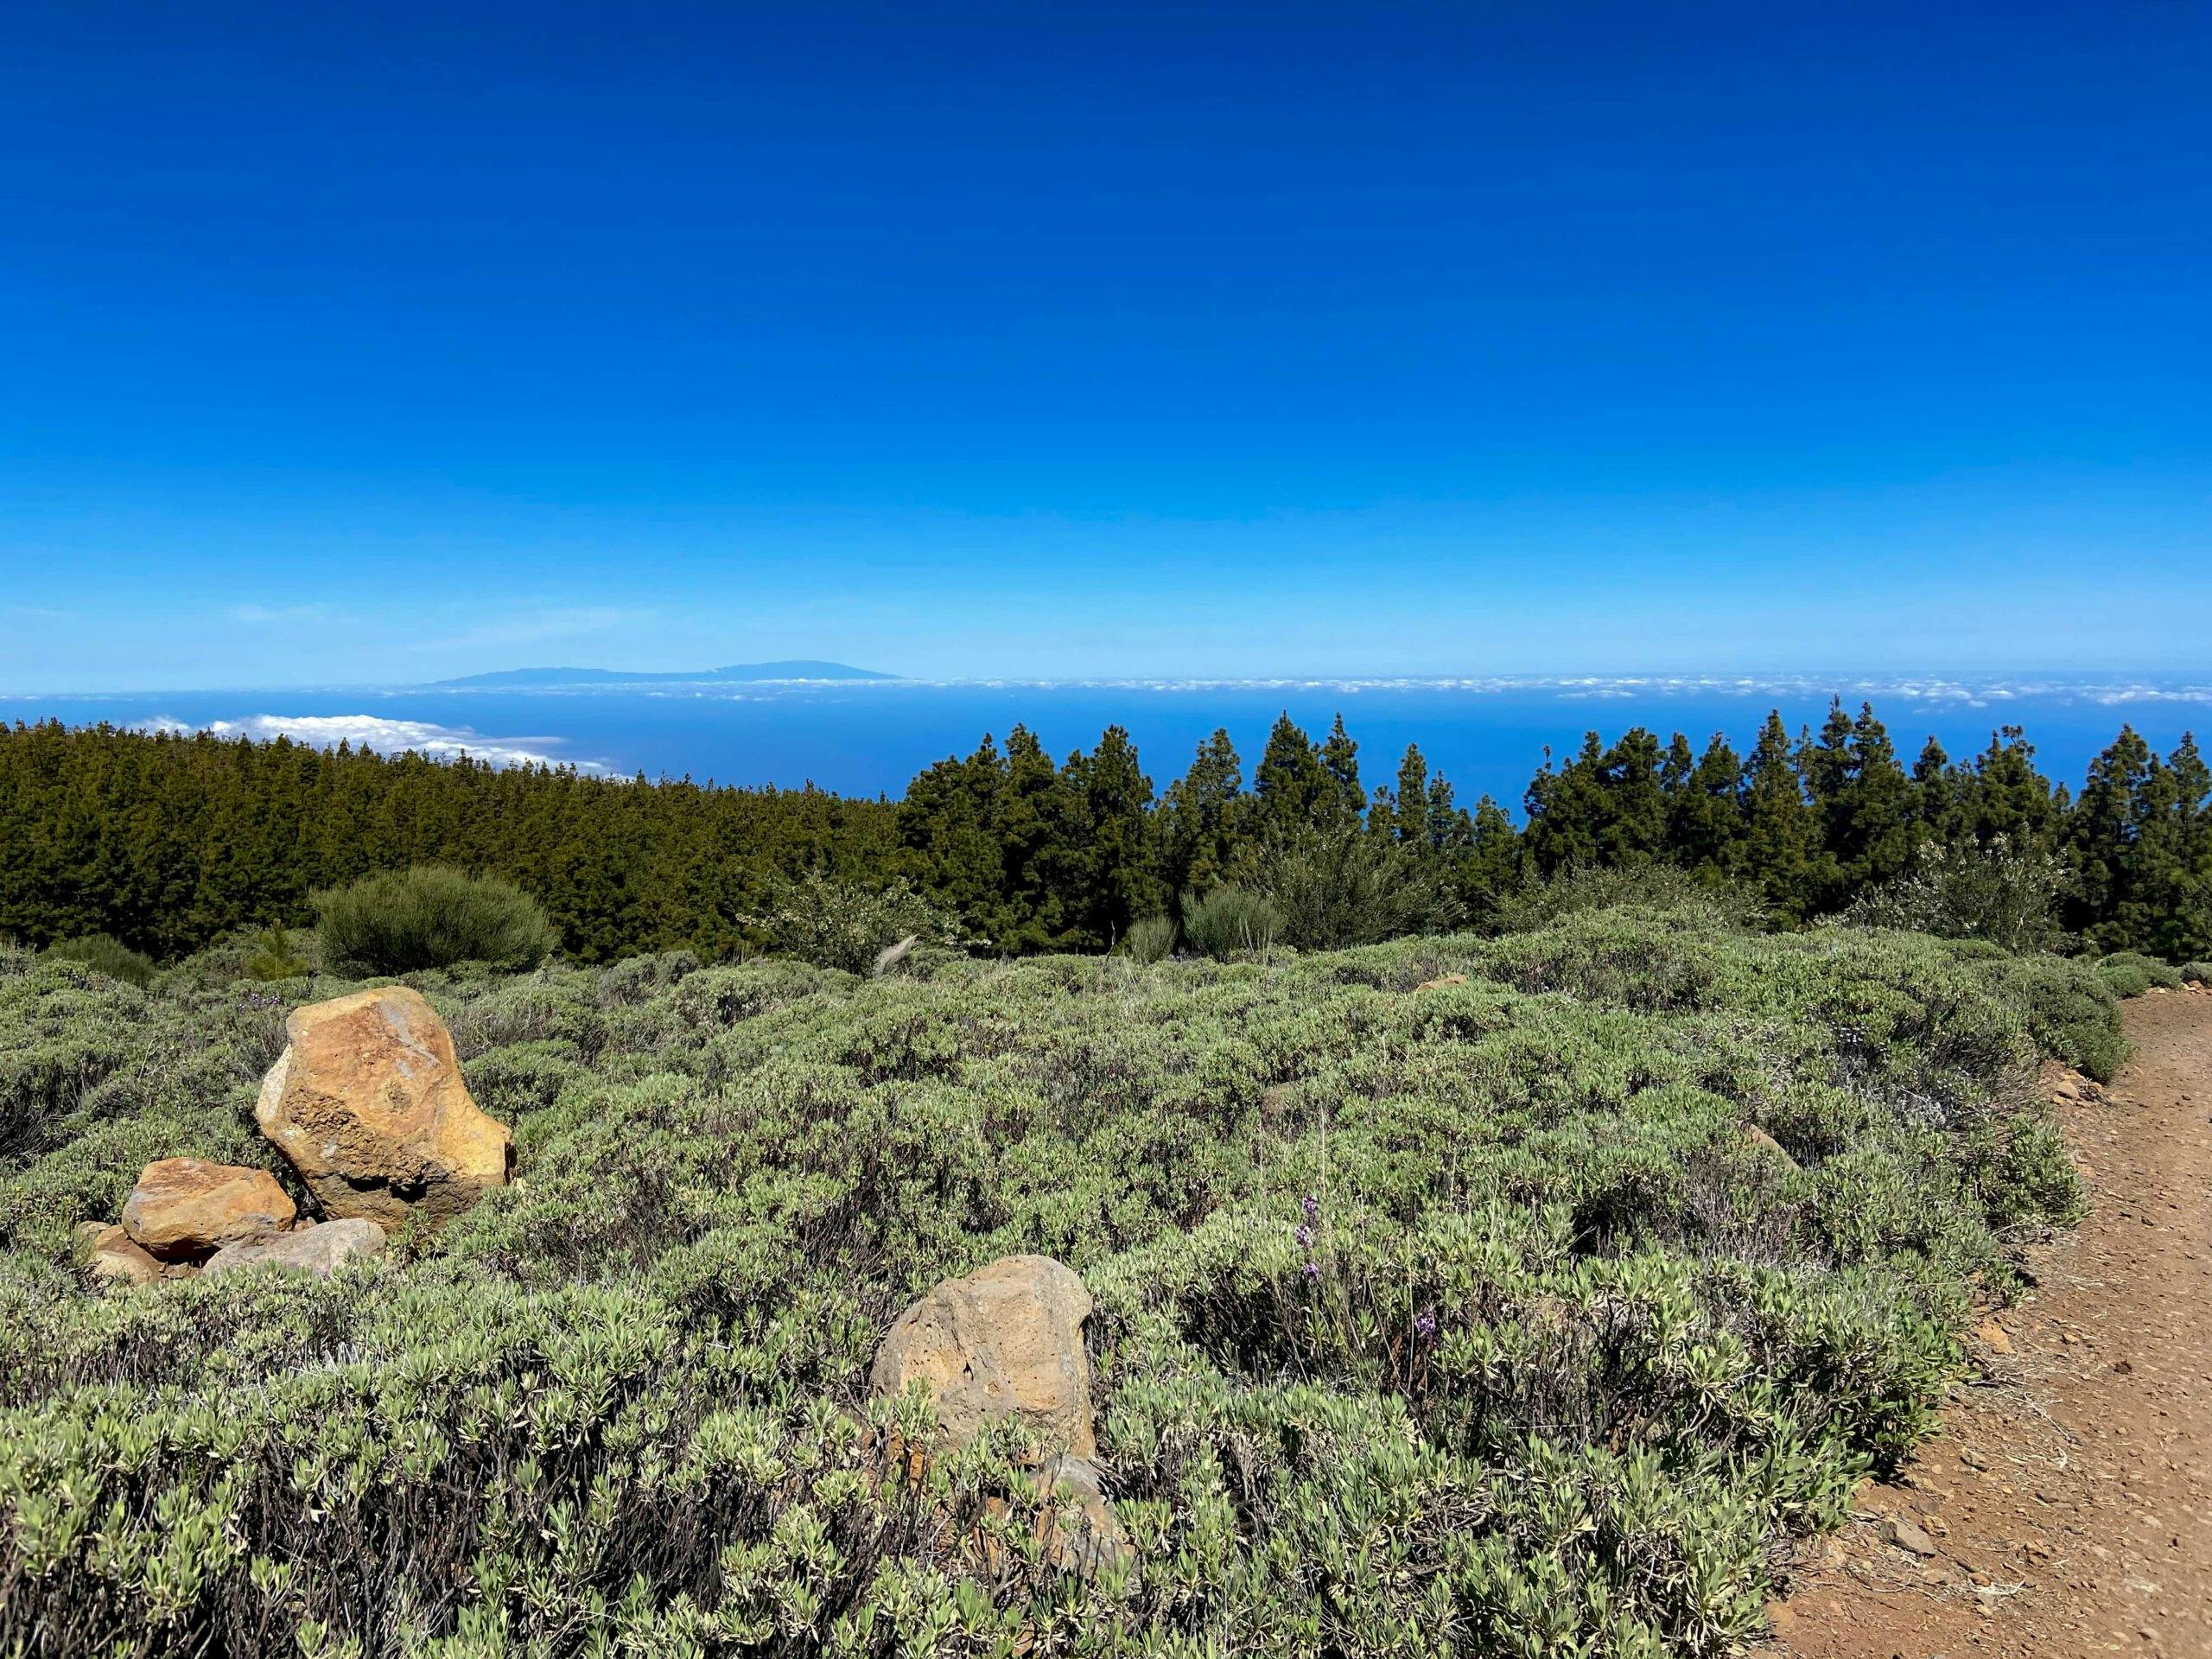 View of La Palma from above